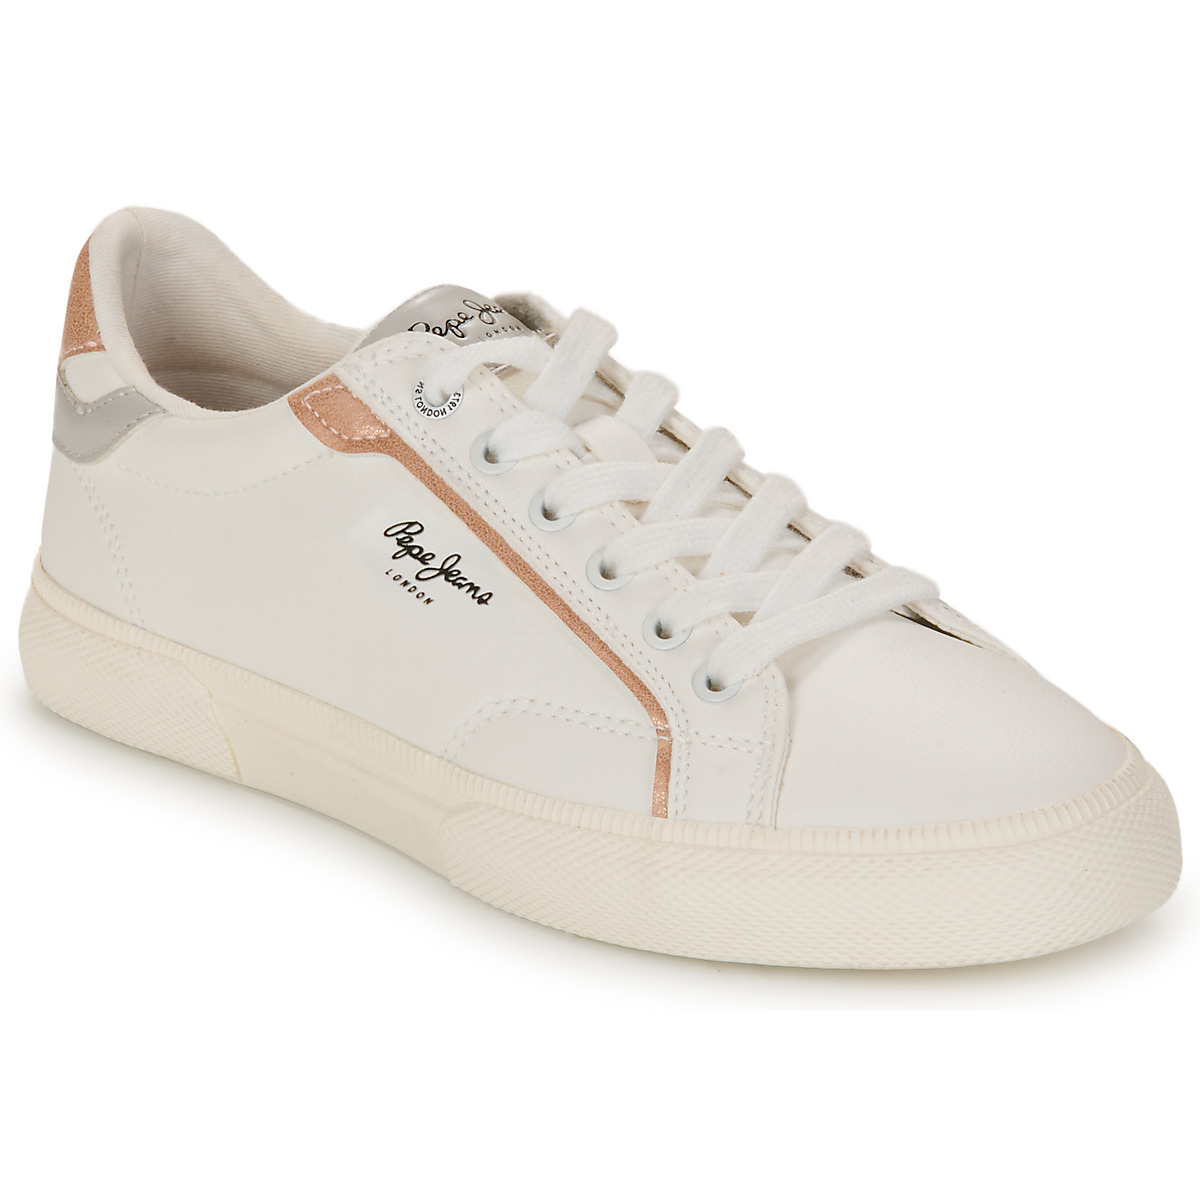 Pepe jeans  Xαμηλά Sneakers Pepe jeans KENTON MIX W